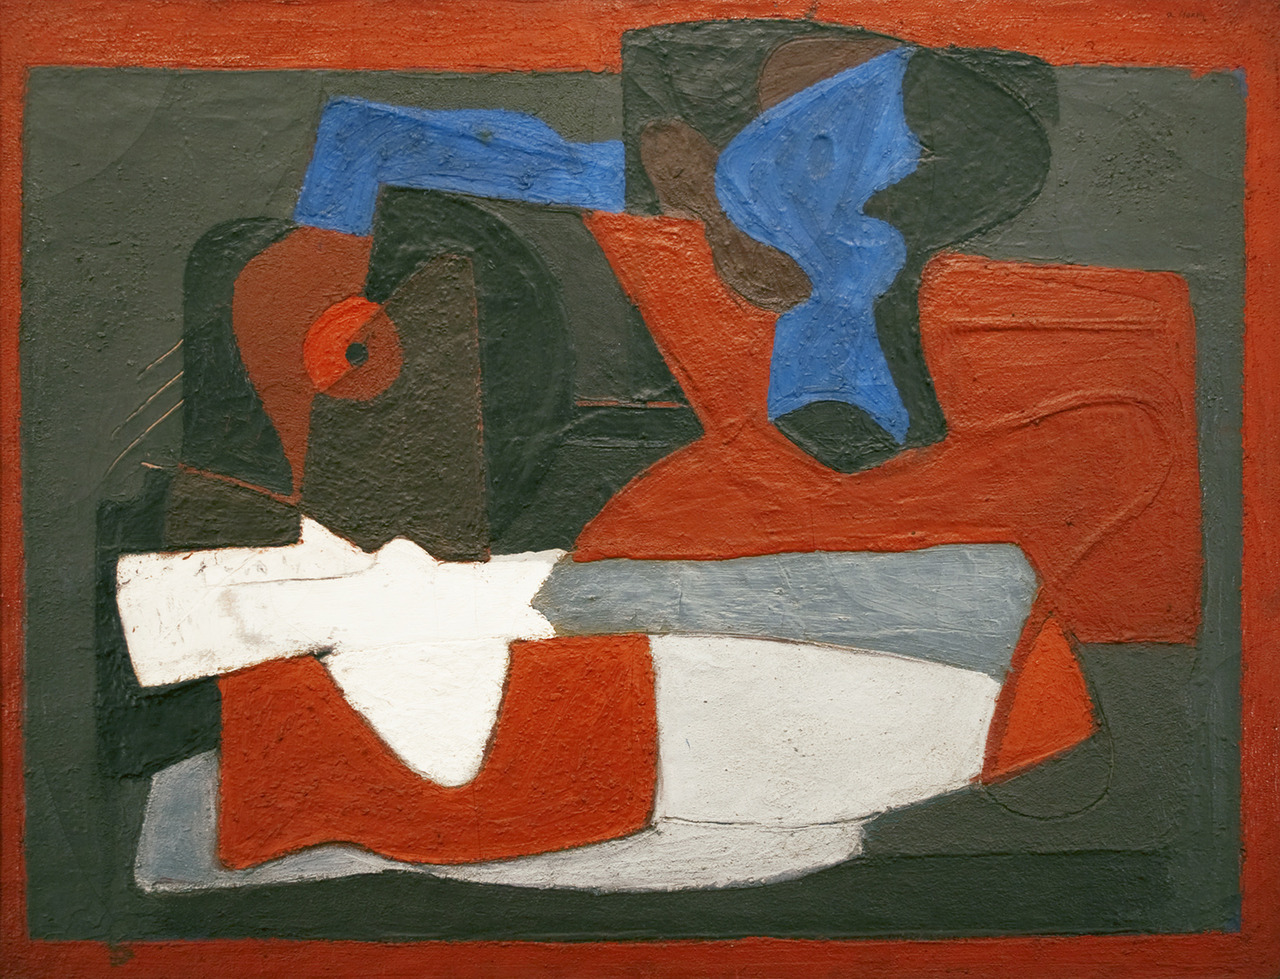 Arshile Gorky (1904–1948), Composition of forms on table (1929), oil on canvas